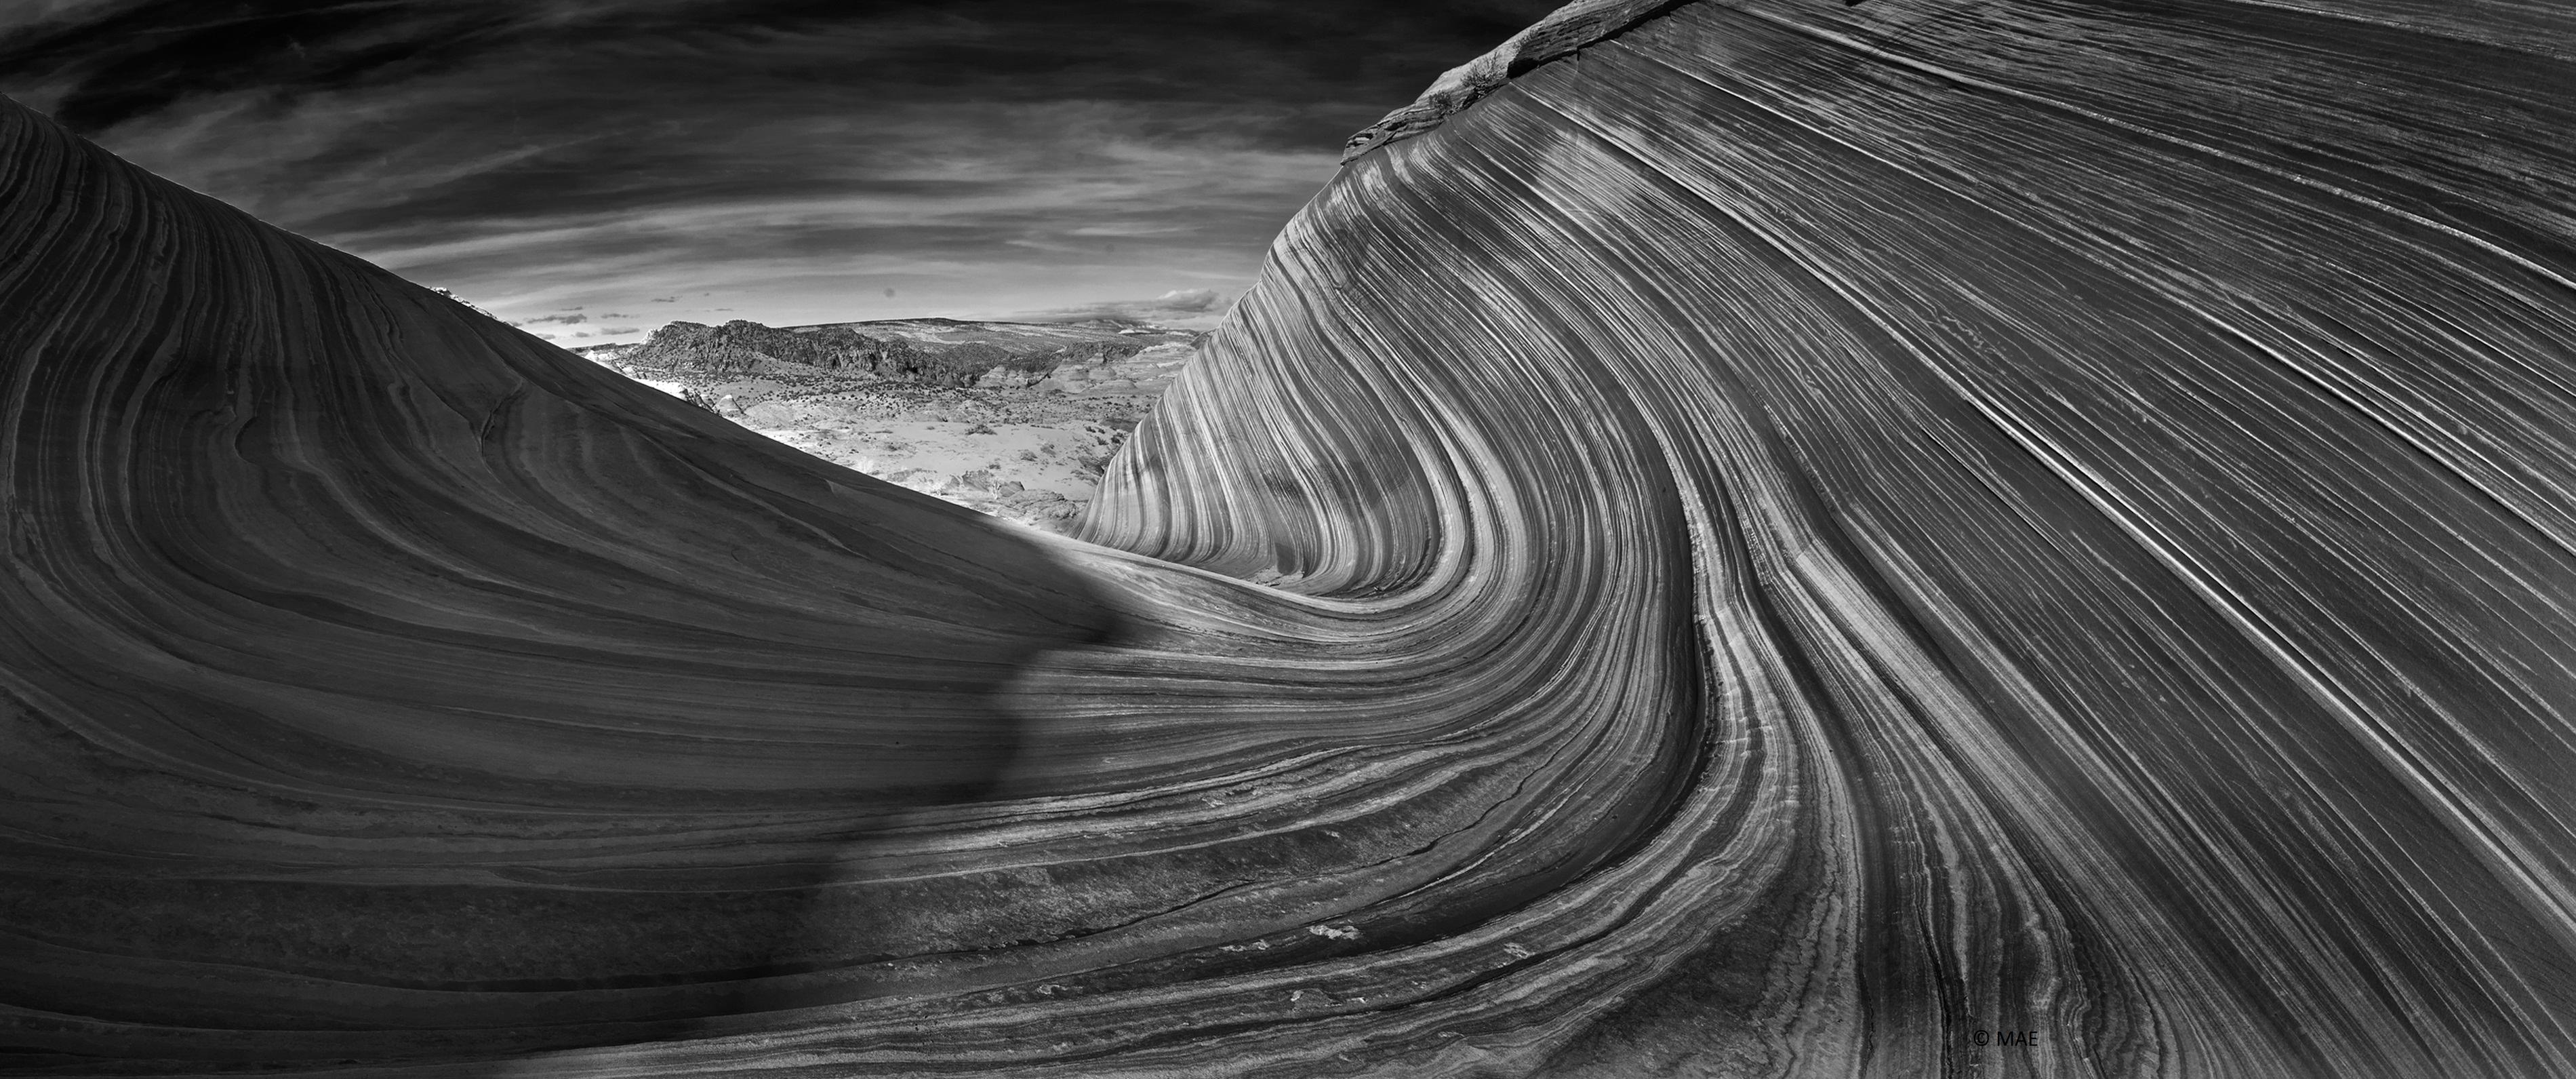 Photography of American landscape series 